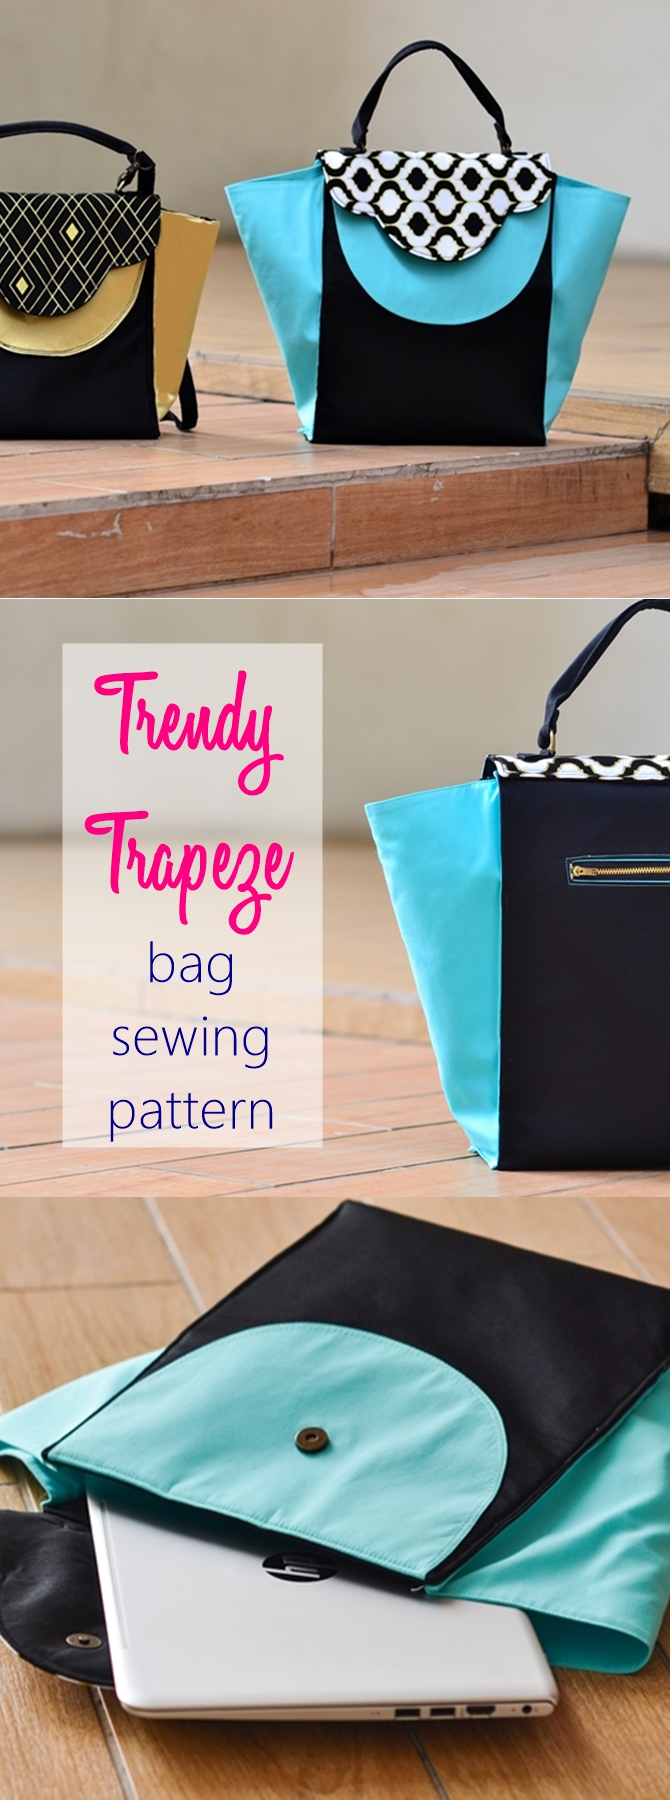 Introducing Trendy Trapeze Bag Sewing Pattern